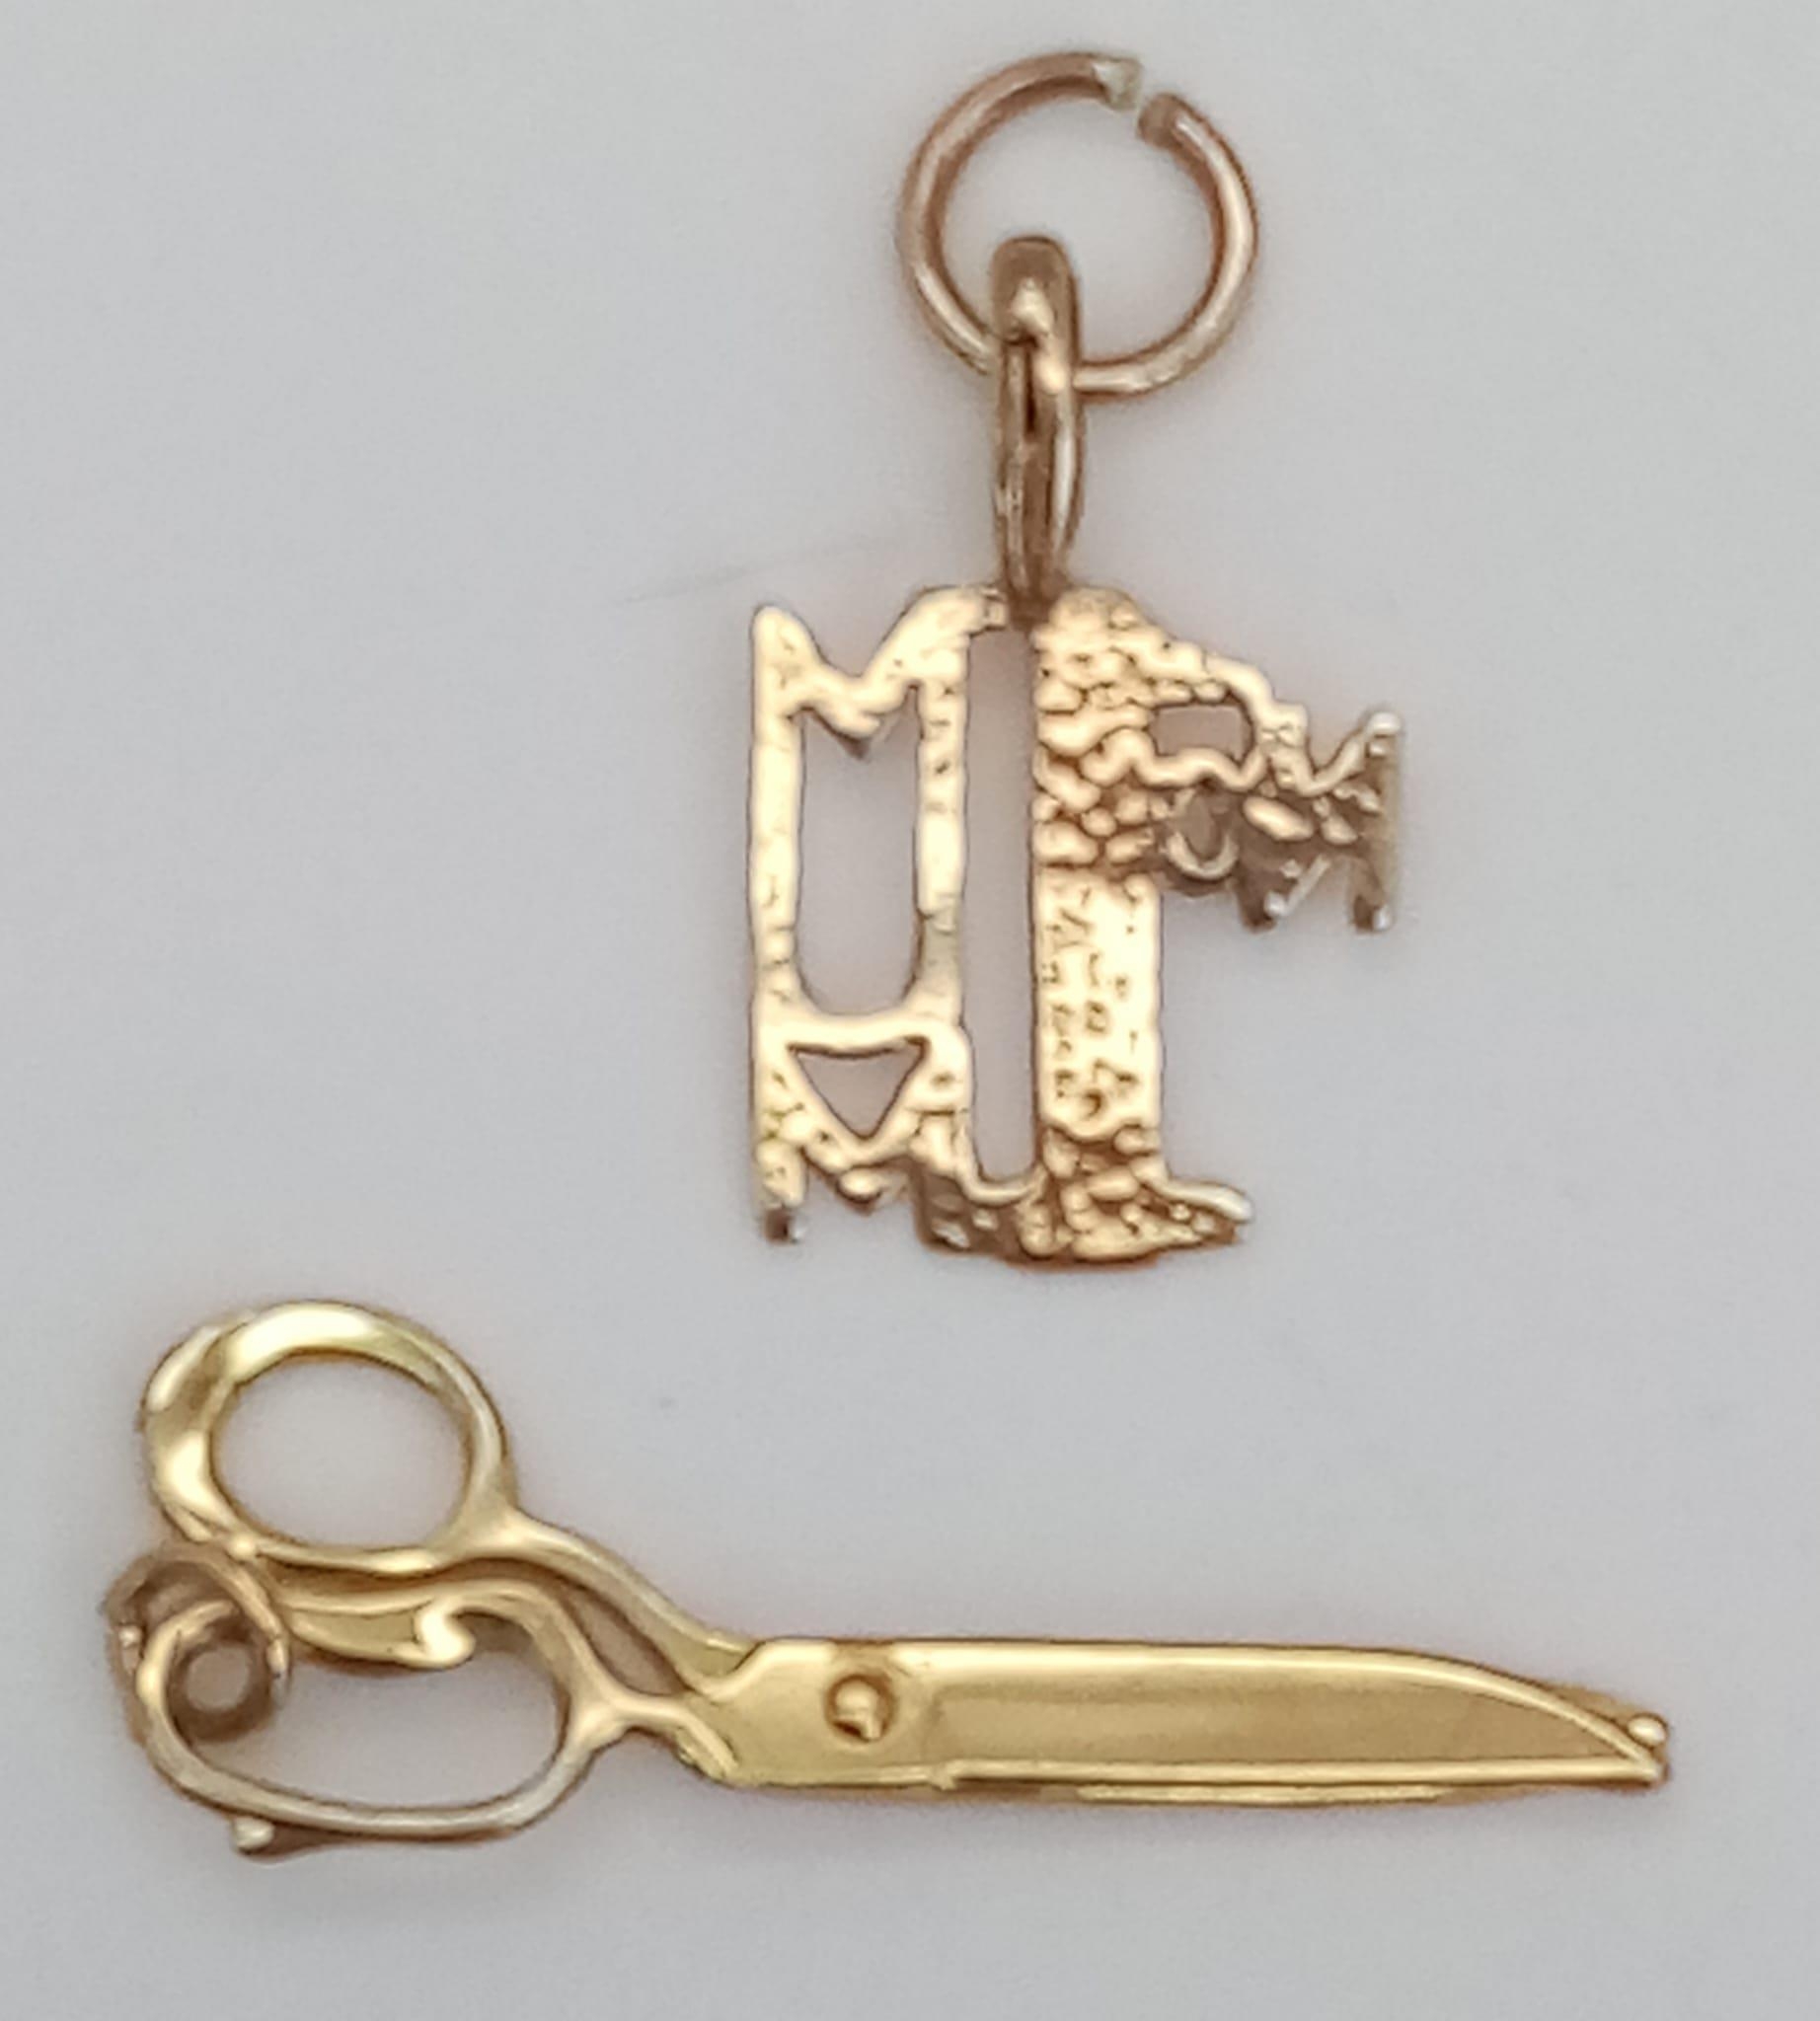 9k yellow gold scissors (0.8g) and number 1 mum charm (0.5g) charms total weight 1.3g - Image 2 of 2